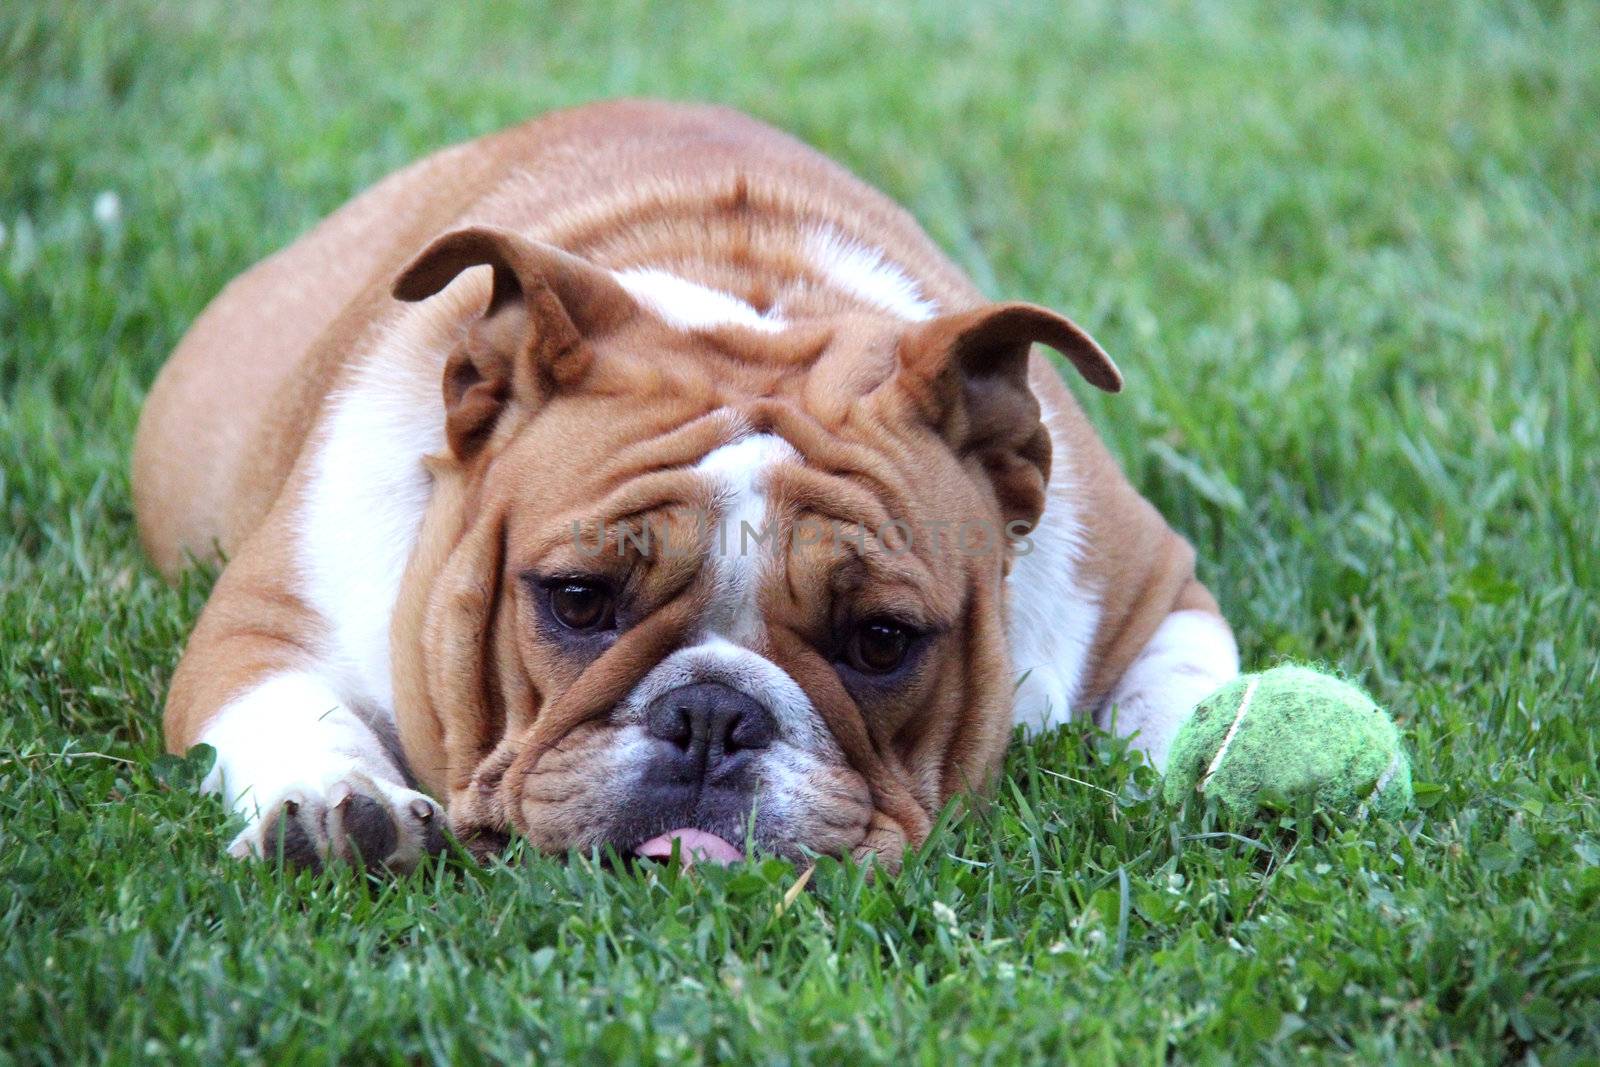 dog begging to play ball - english bulldog laying beside tennis ball in the grass